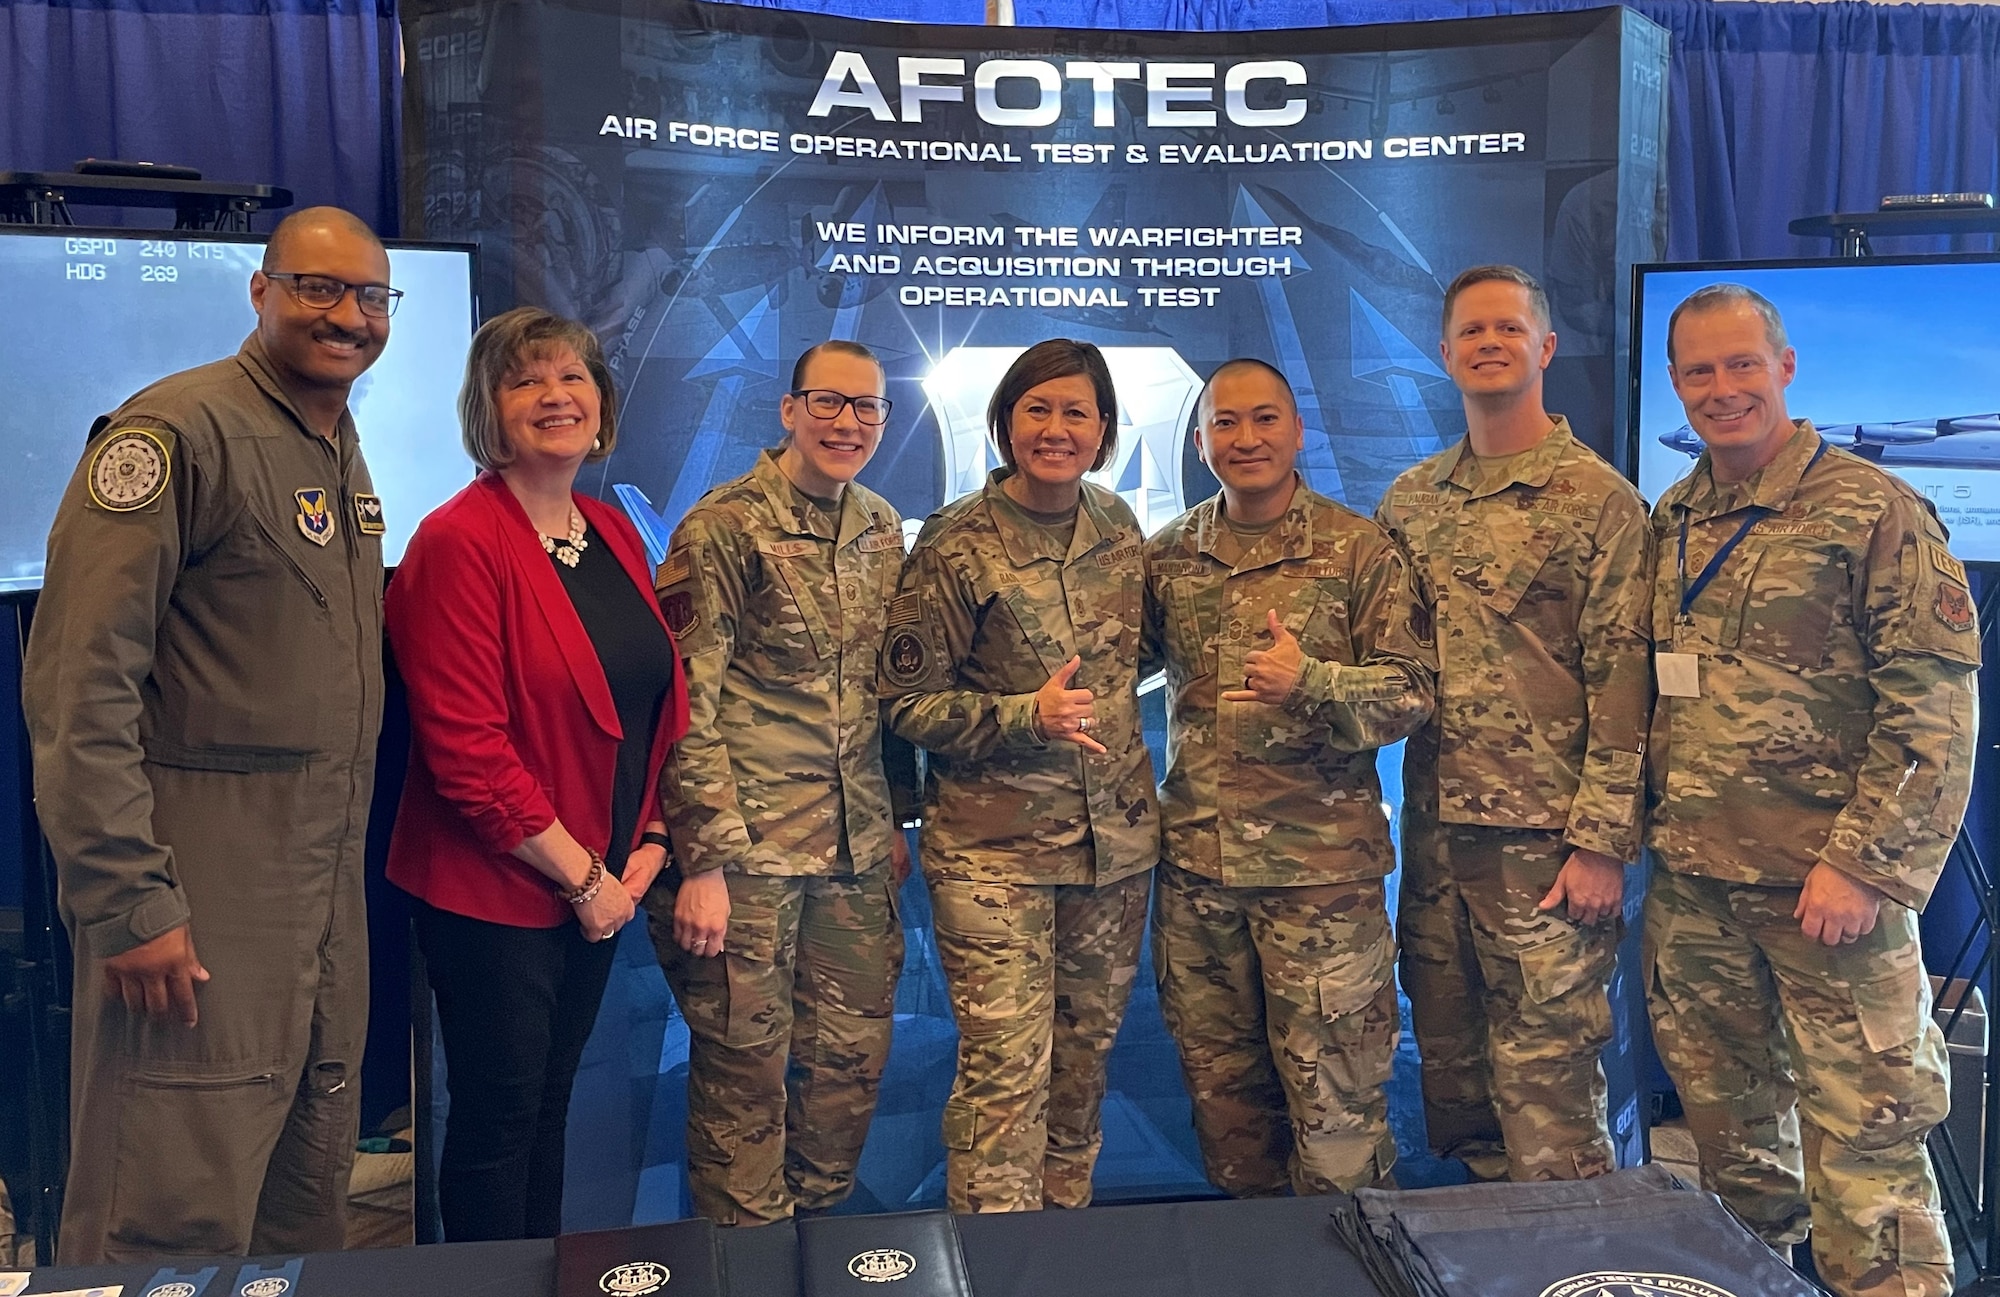 Chief Master Sergeant of the Air Force JoAnne Bass visits the Air Force Operational Test and Evaluation Center Display team at the 2022 Air Force Sergeants’ Association Professional Education and Development Symposium held in San Antonio, Texas. Display team members include (left to right) SMSgt. Brian Pettaway, Katherine Gandara, MSgt. Michelle Mills, SMSgt. Matthew Mantanona, MSgt. Sean Haugen, and AFOTEC Command Chief CMSgt. Christopher Griste.